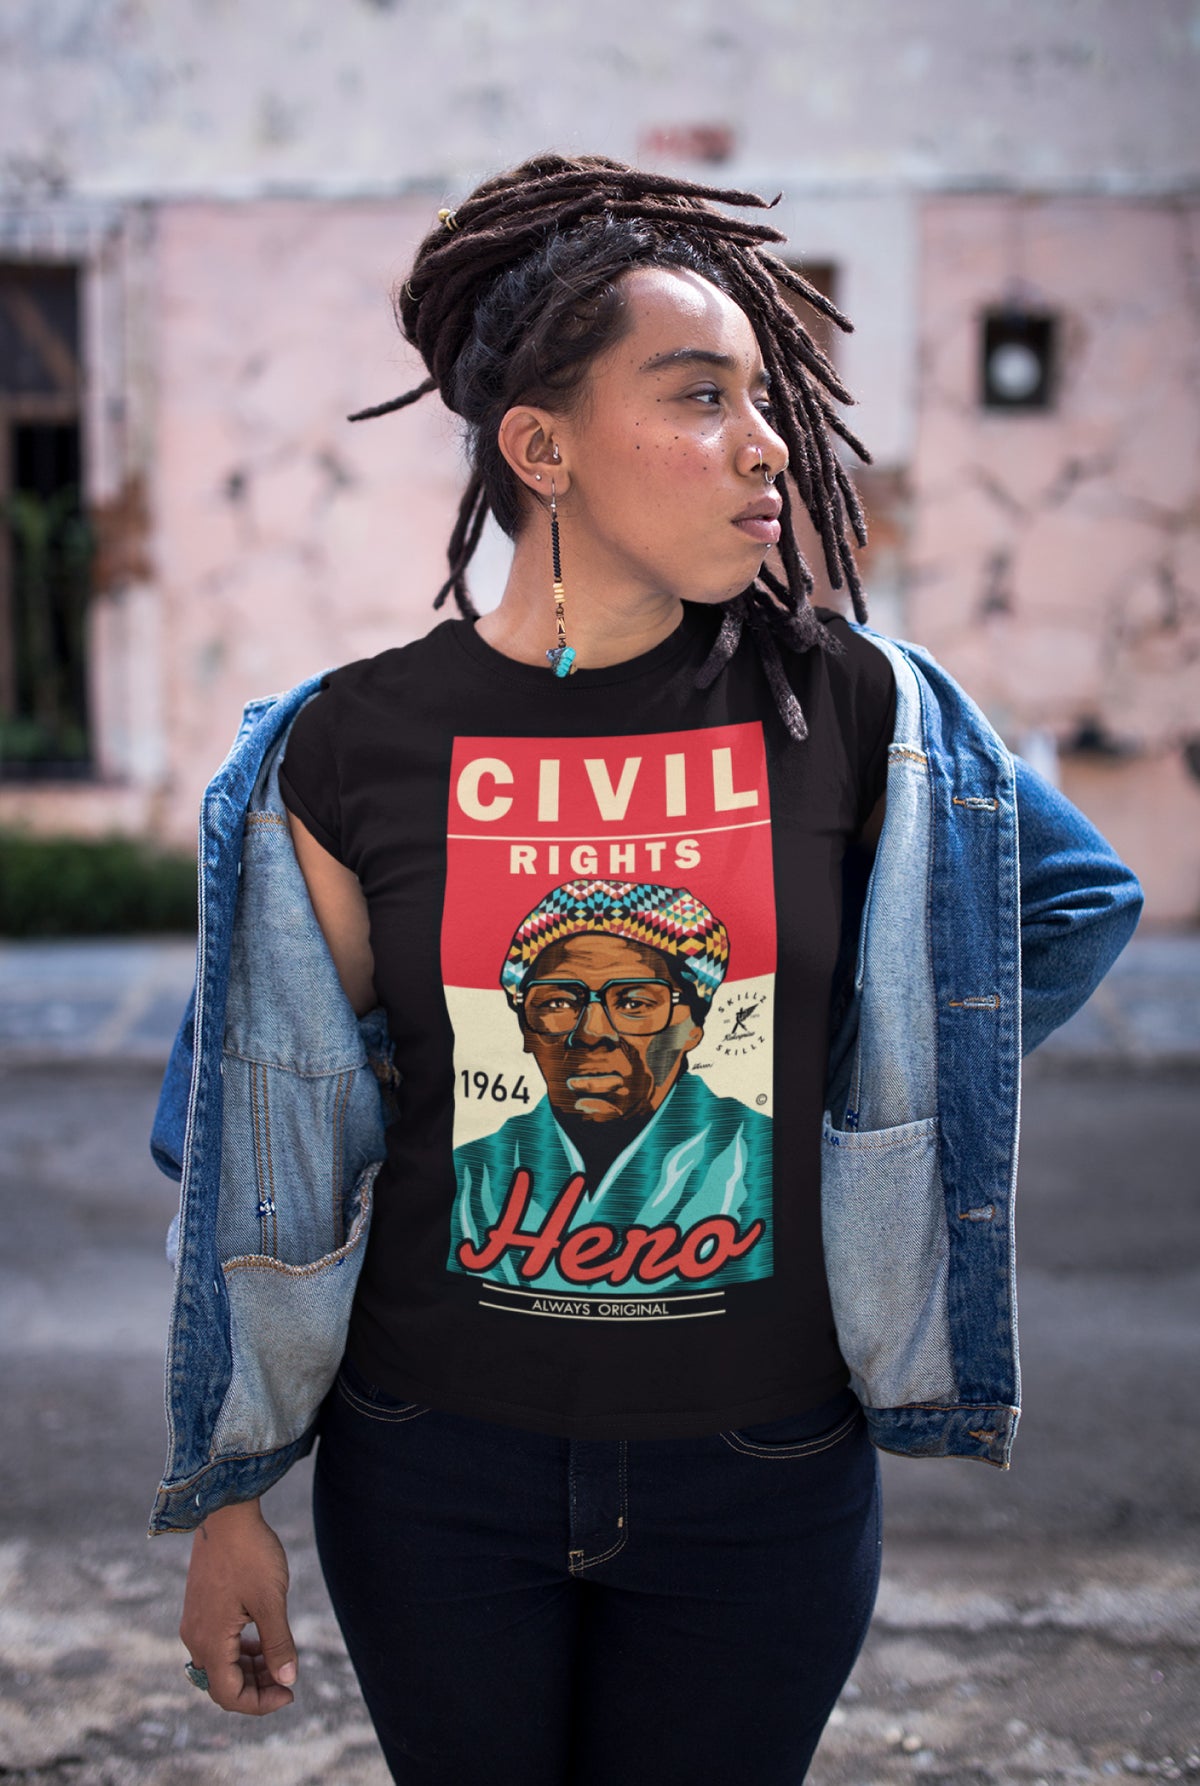 "Civil Rights Hero's Limited Collection"